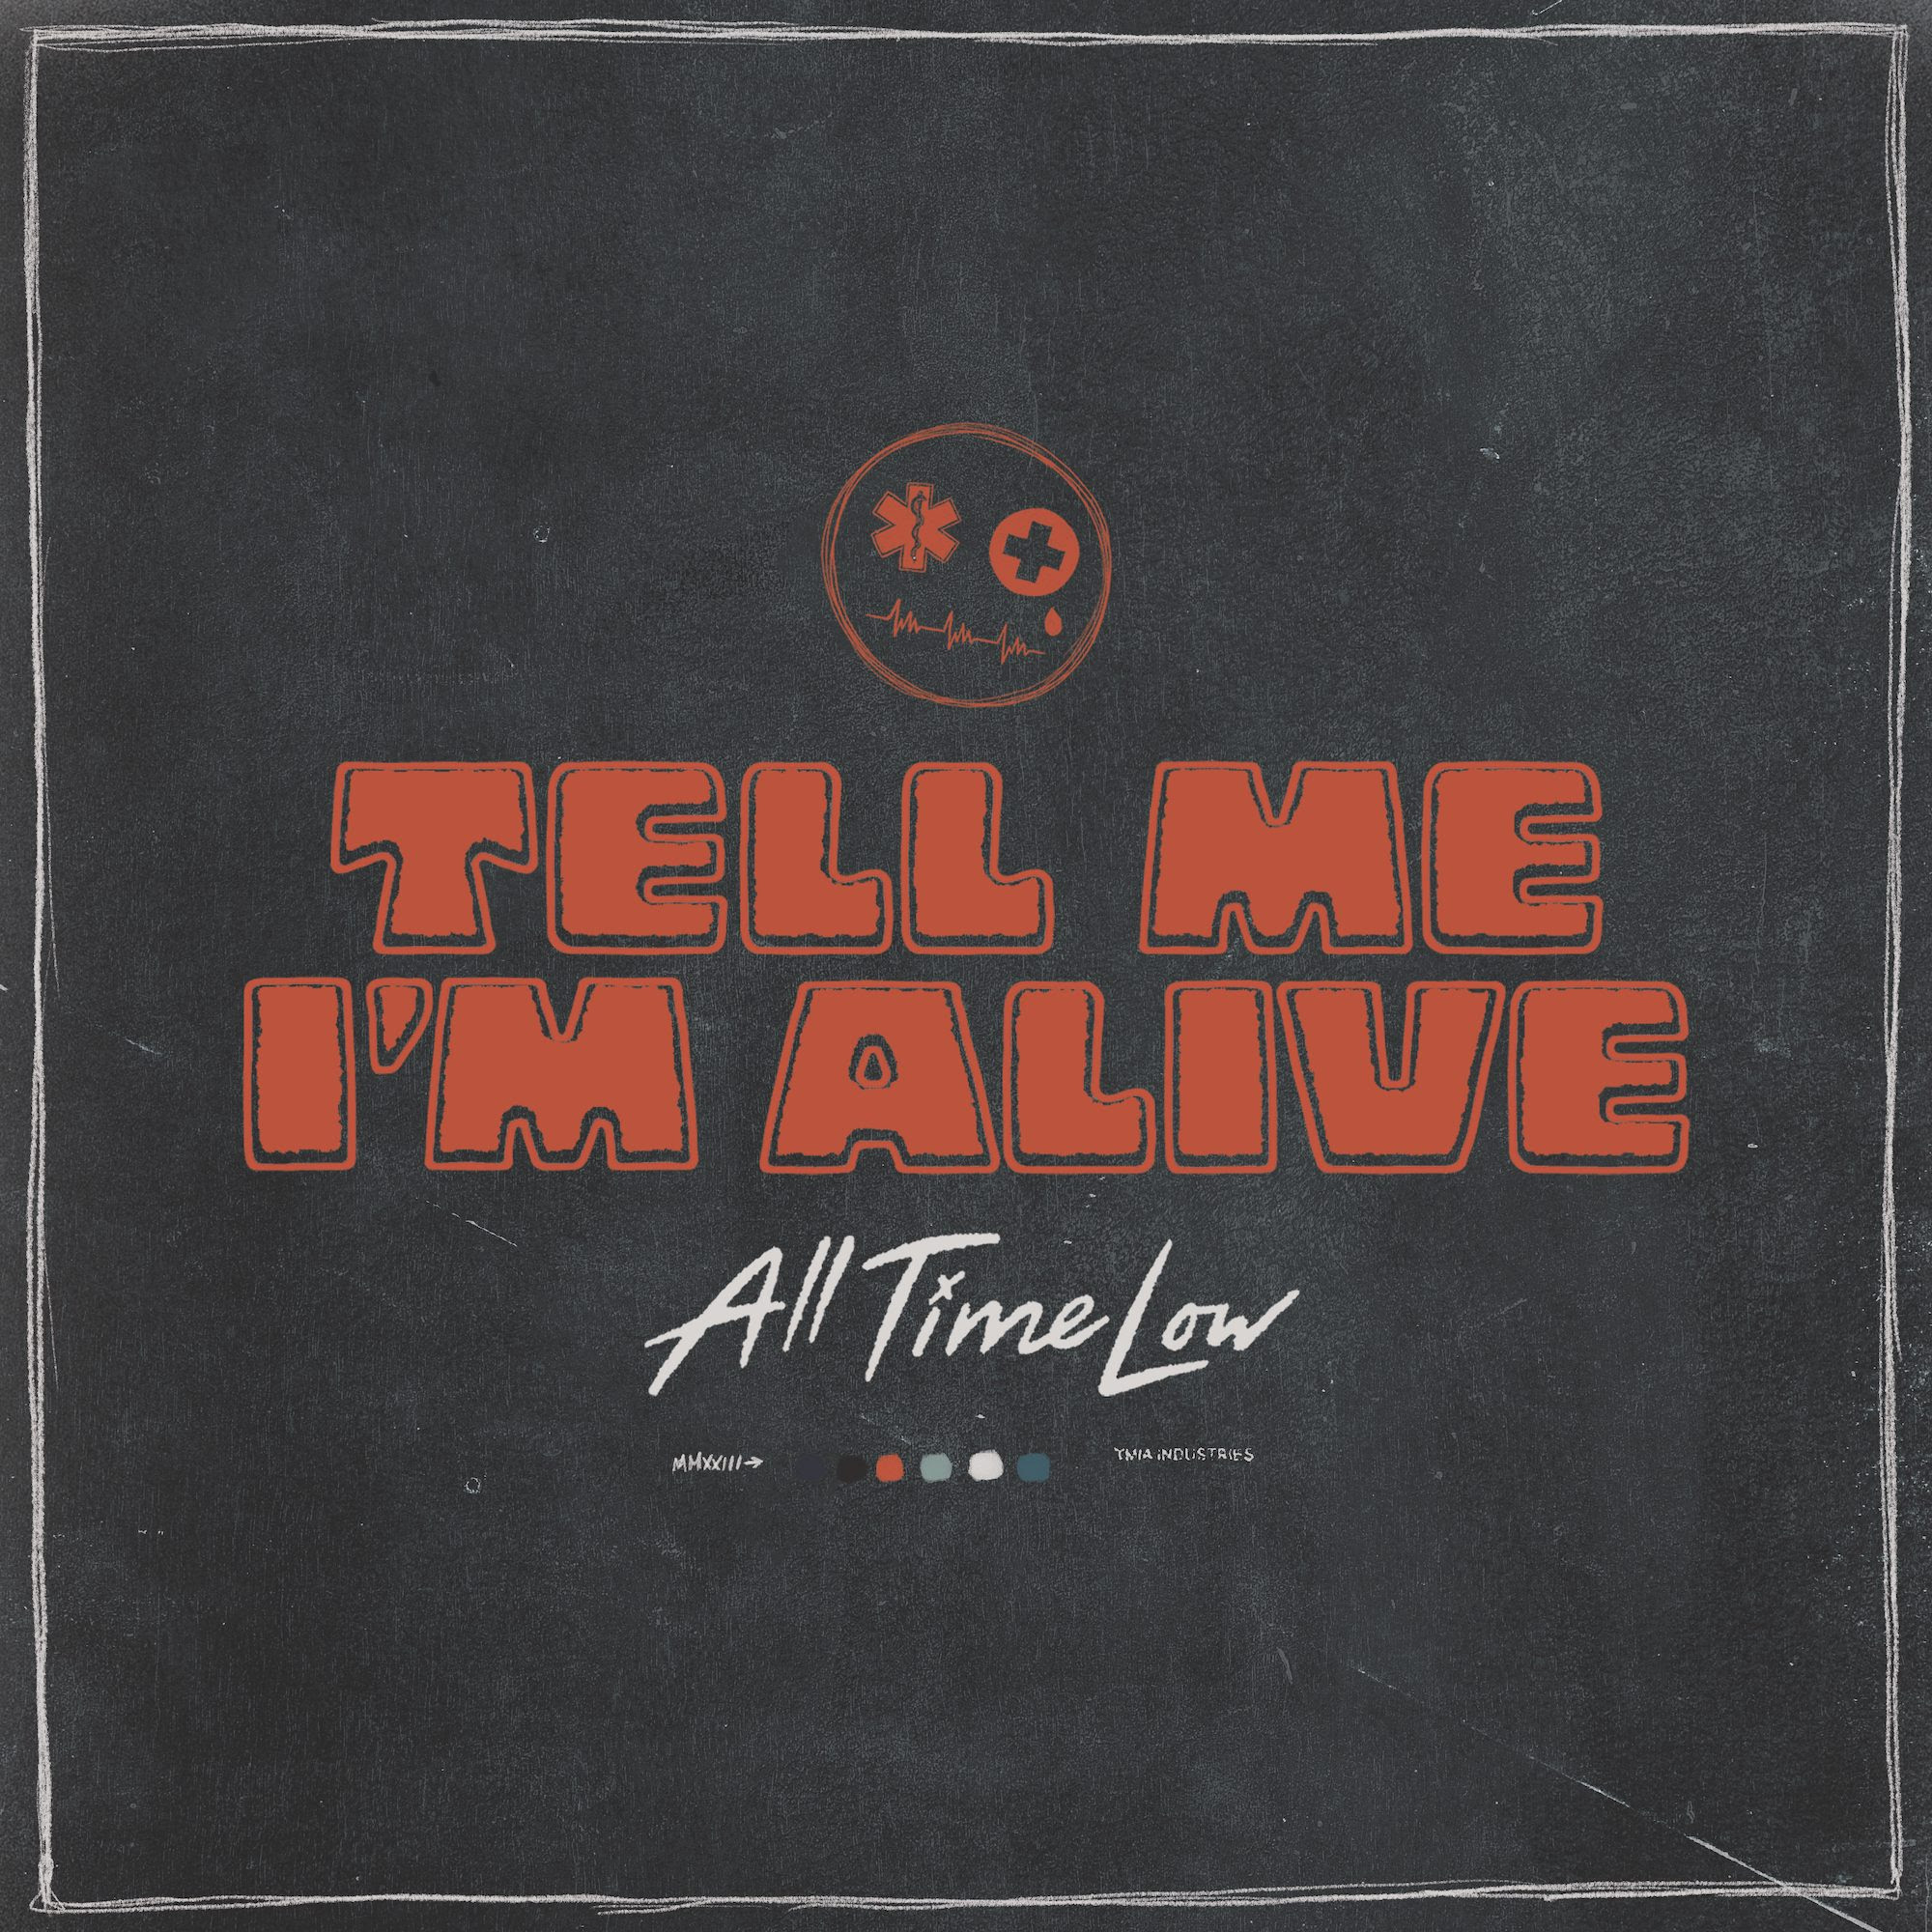 All Time Low - Tell Me I'm Alive artwork